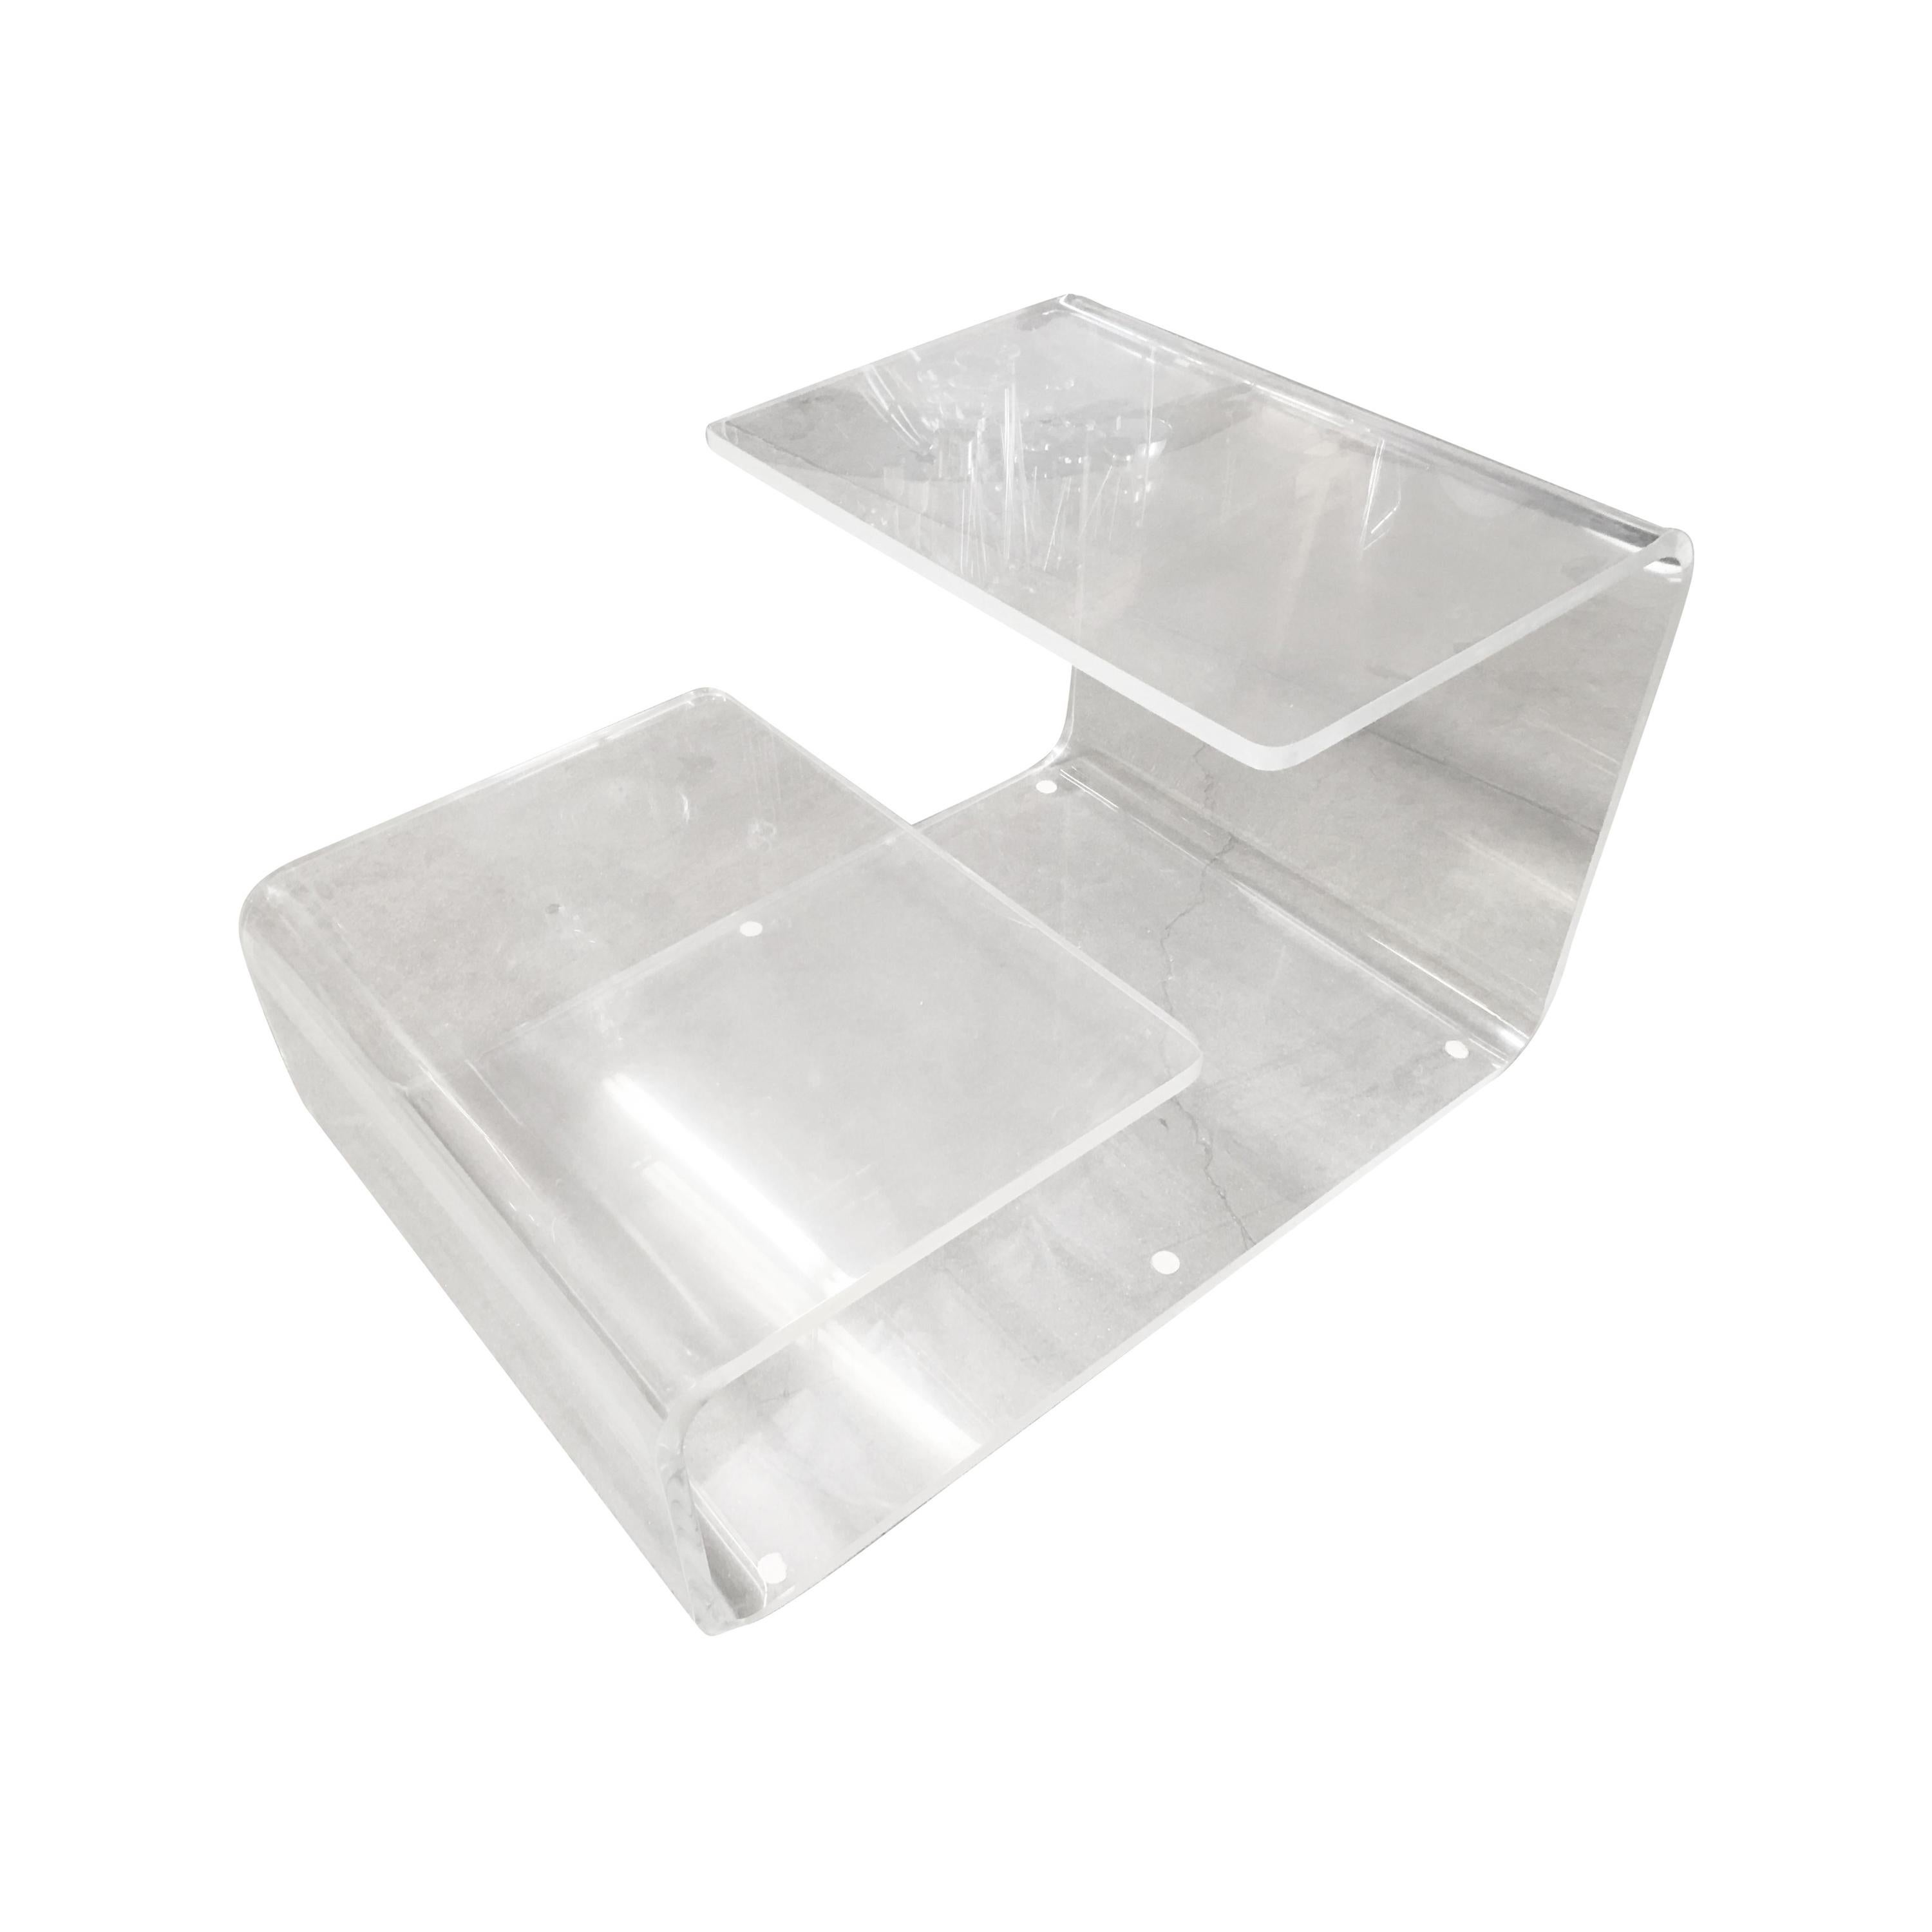 Transparent Acrylic Side-Table with Multi-Purpose Two-Tier Table Tops